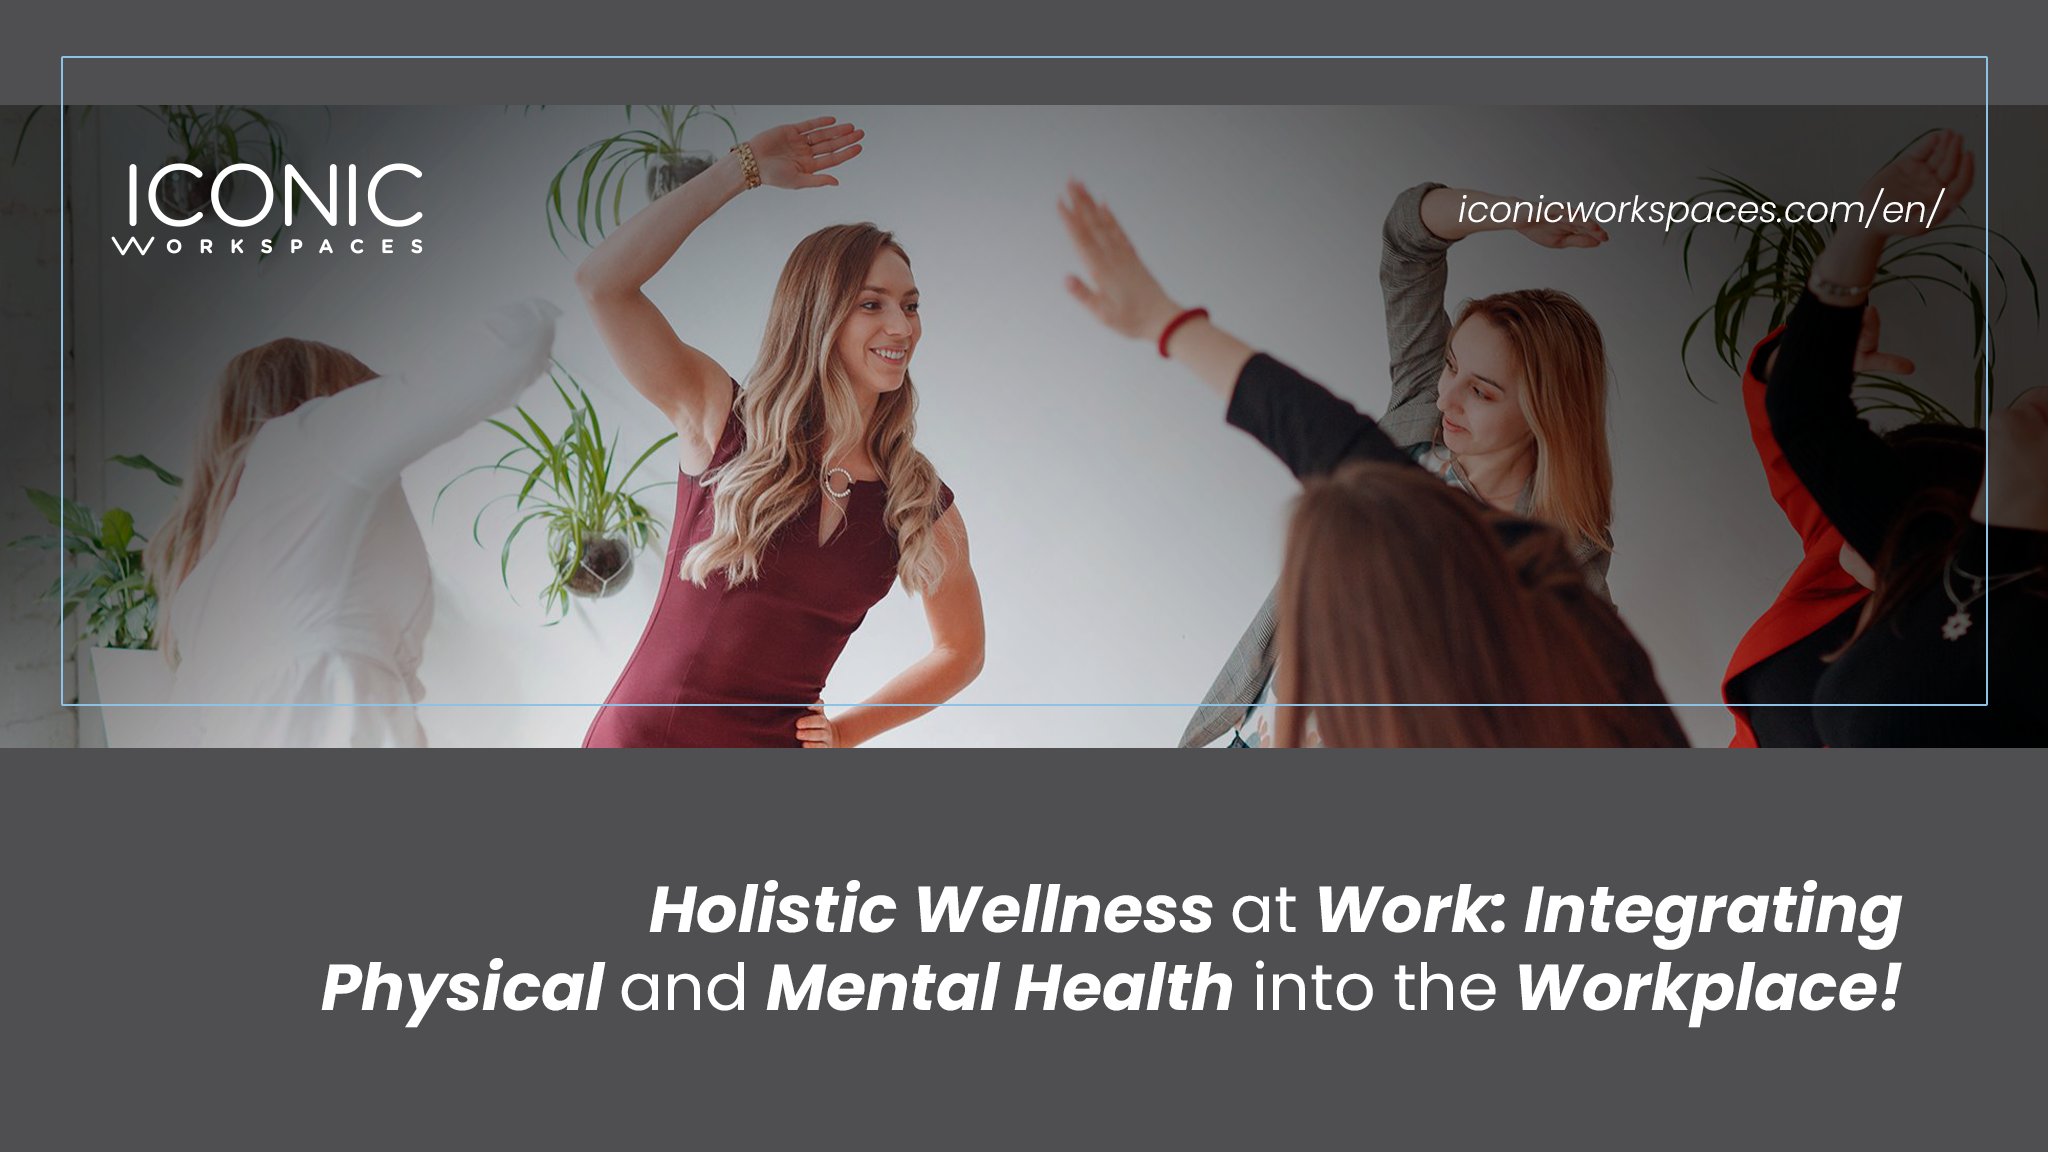 Holistic Wellness at Work: Integrating Physical and Mental Health into the Workplace